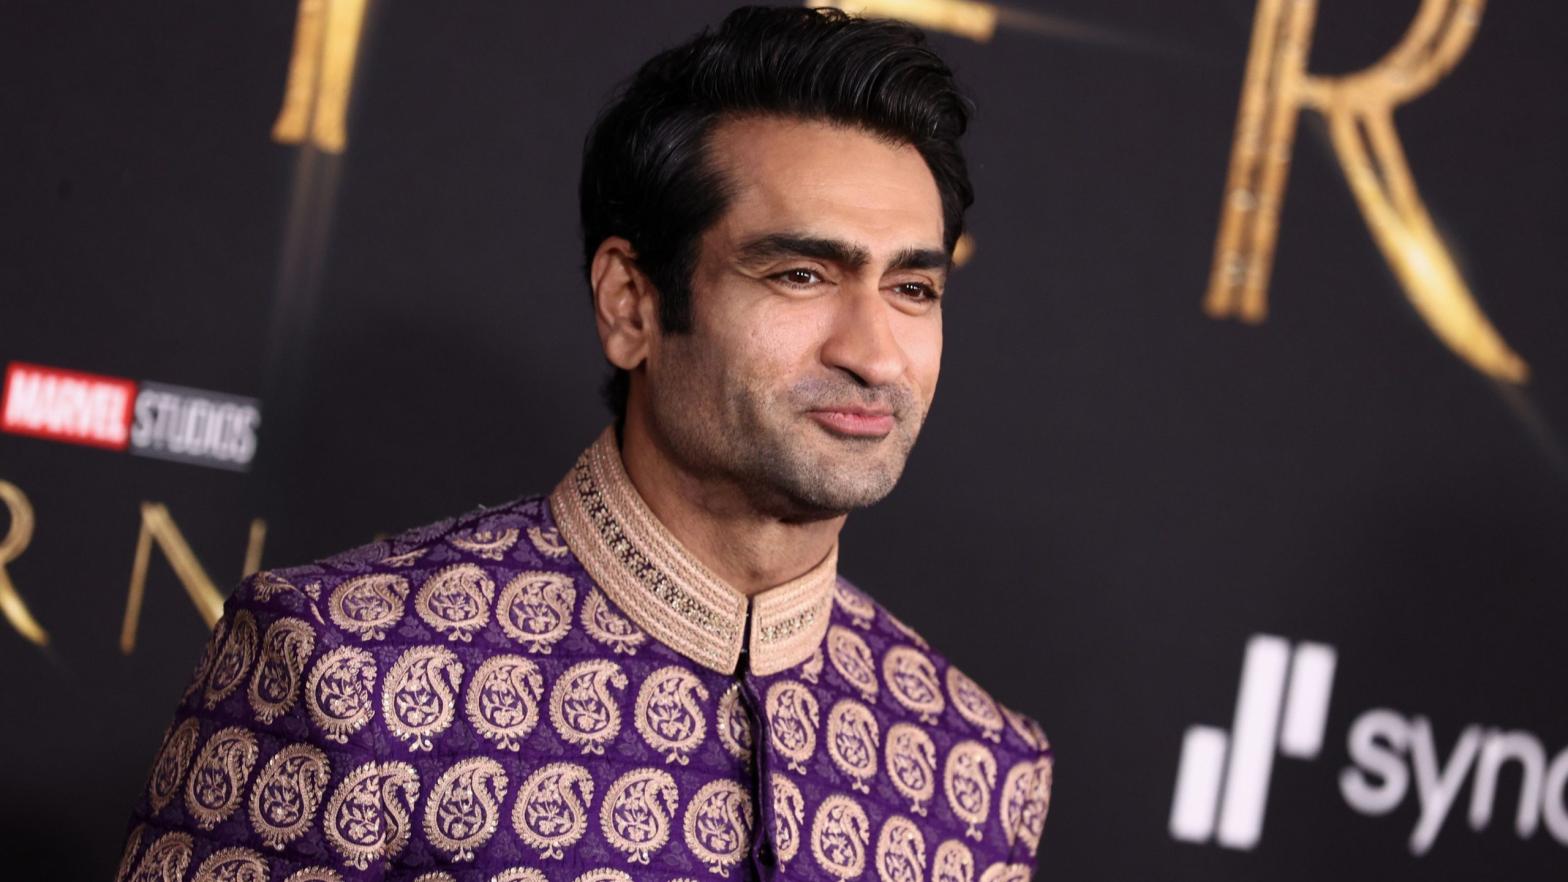 Kumail Nanjiani at Marvel's Eternals premiere on October 18 in Hollywood. (Photo: Rich Fury, Getty Images)